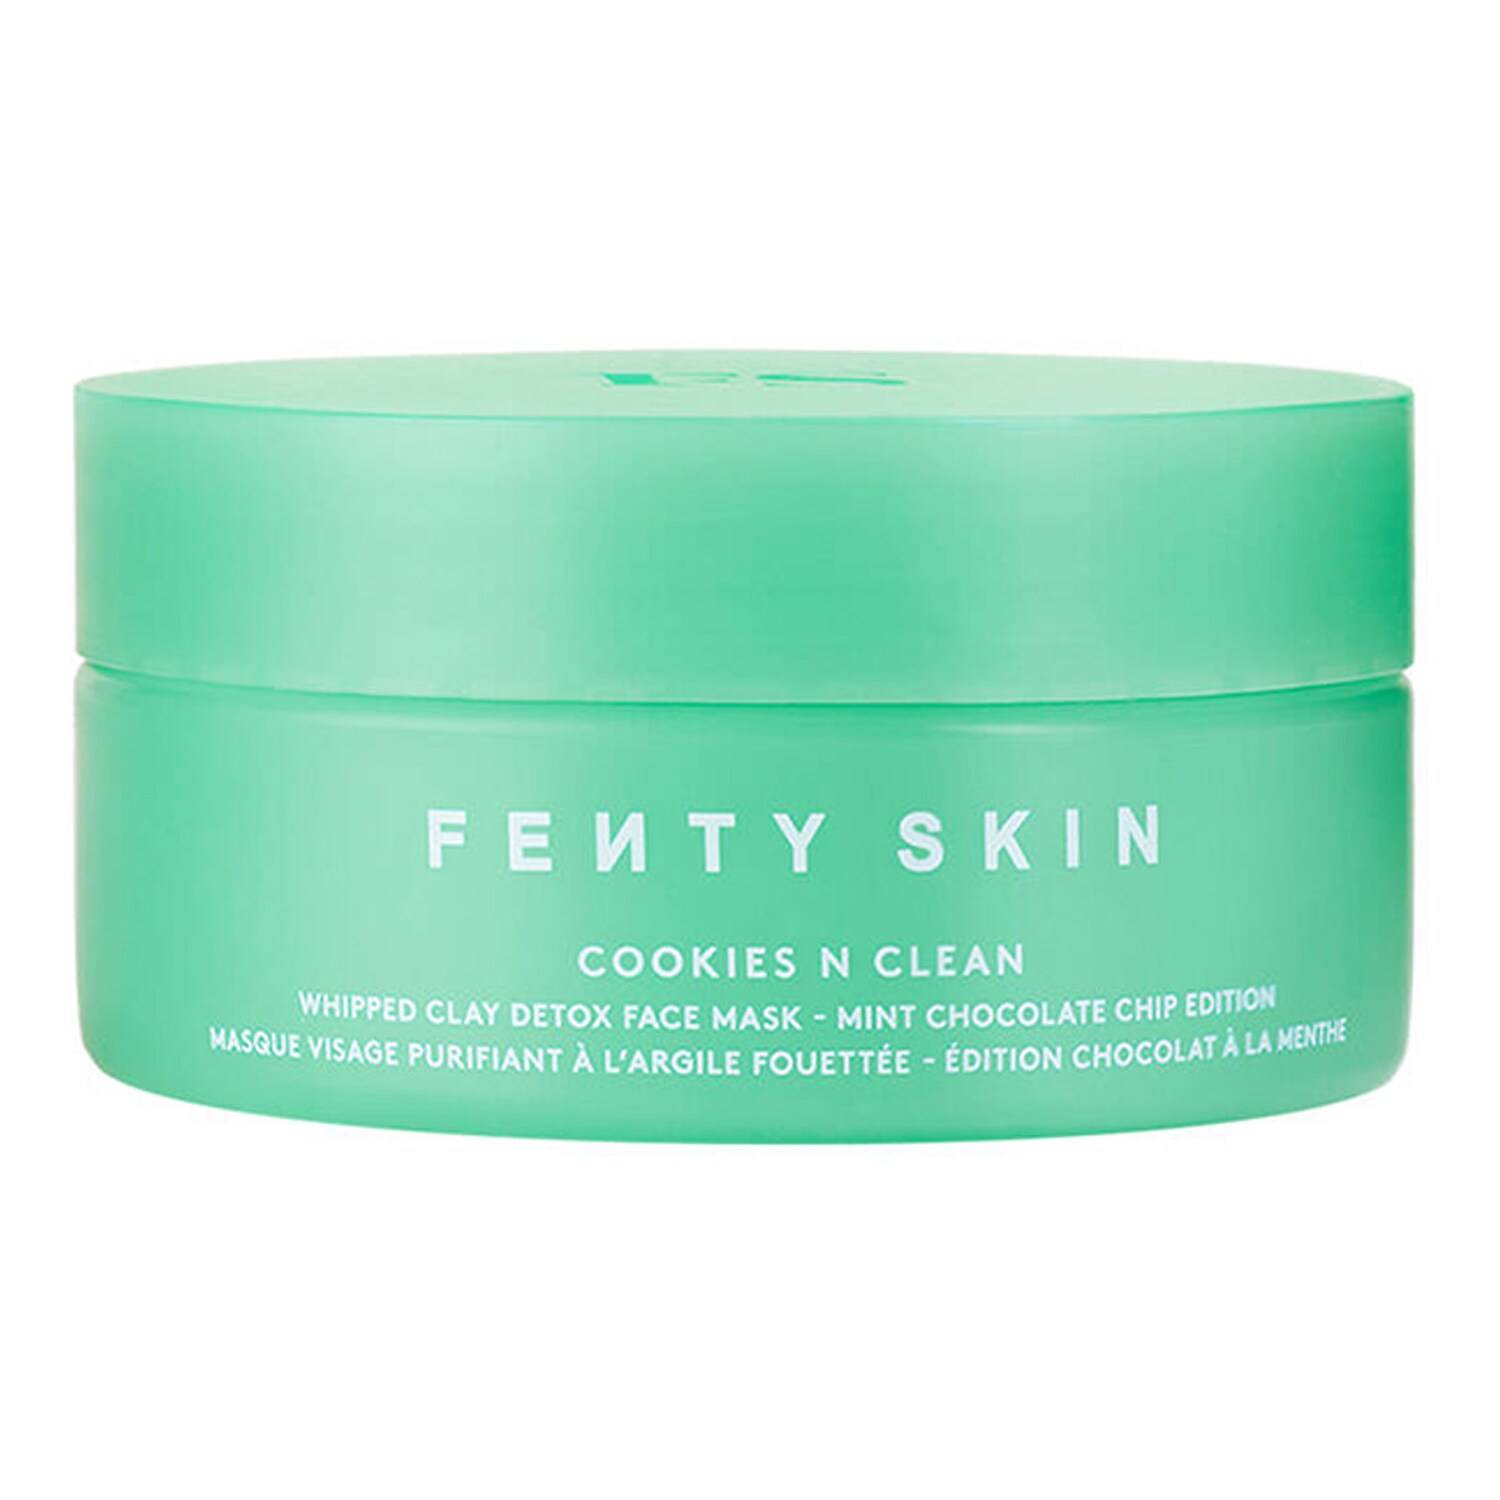 FENTY SKIN Cookies N Clean Whipped Clay Detox Face Mask Mint Chocolate Chip Edition 75ml